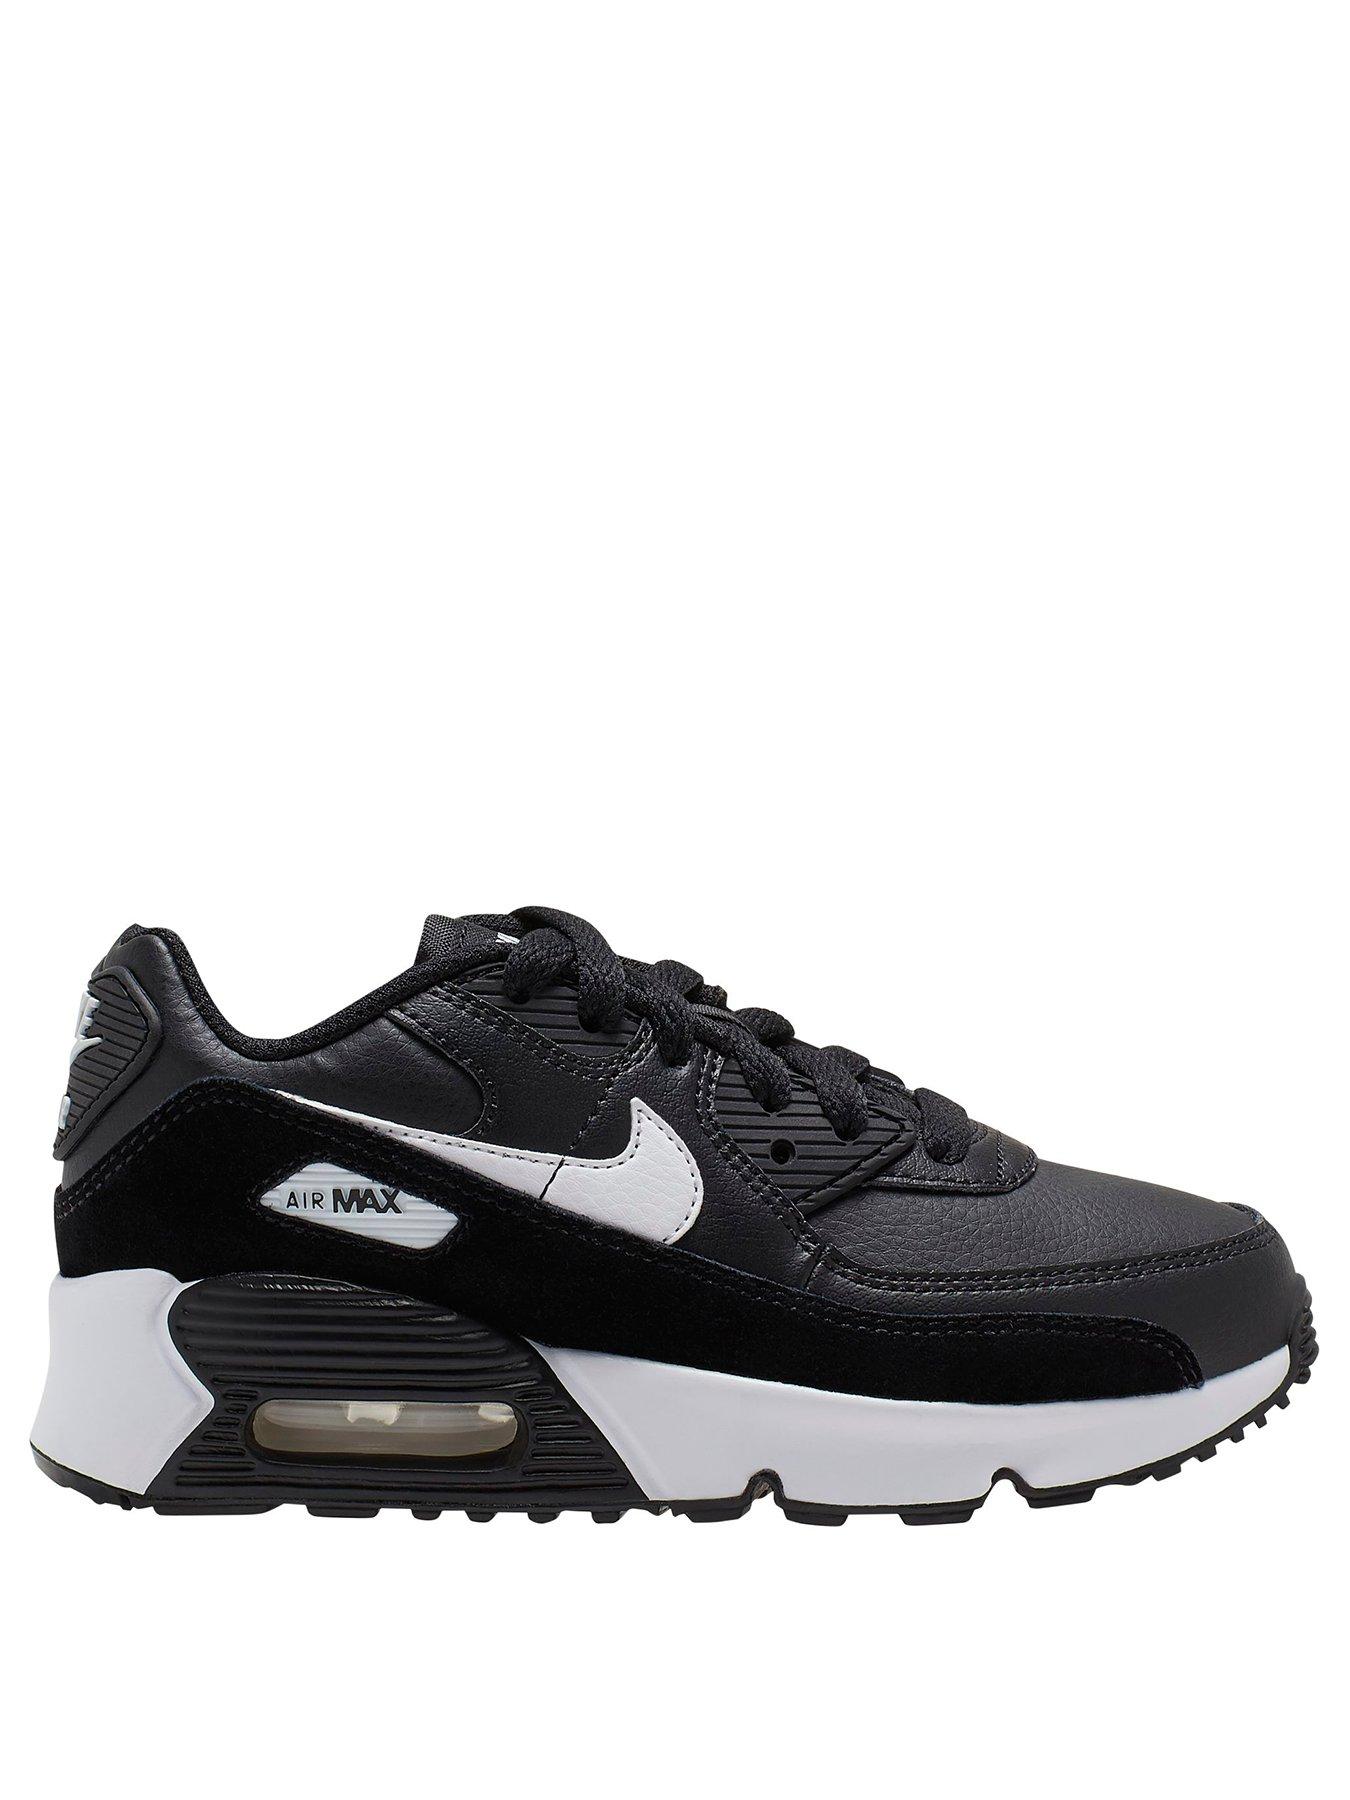 childrens nike air max 90 trainers